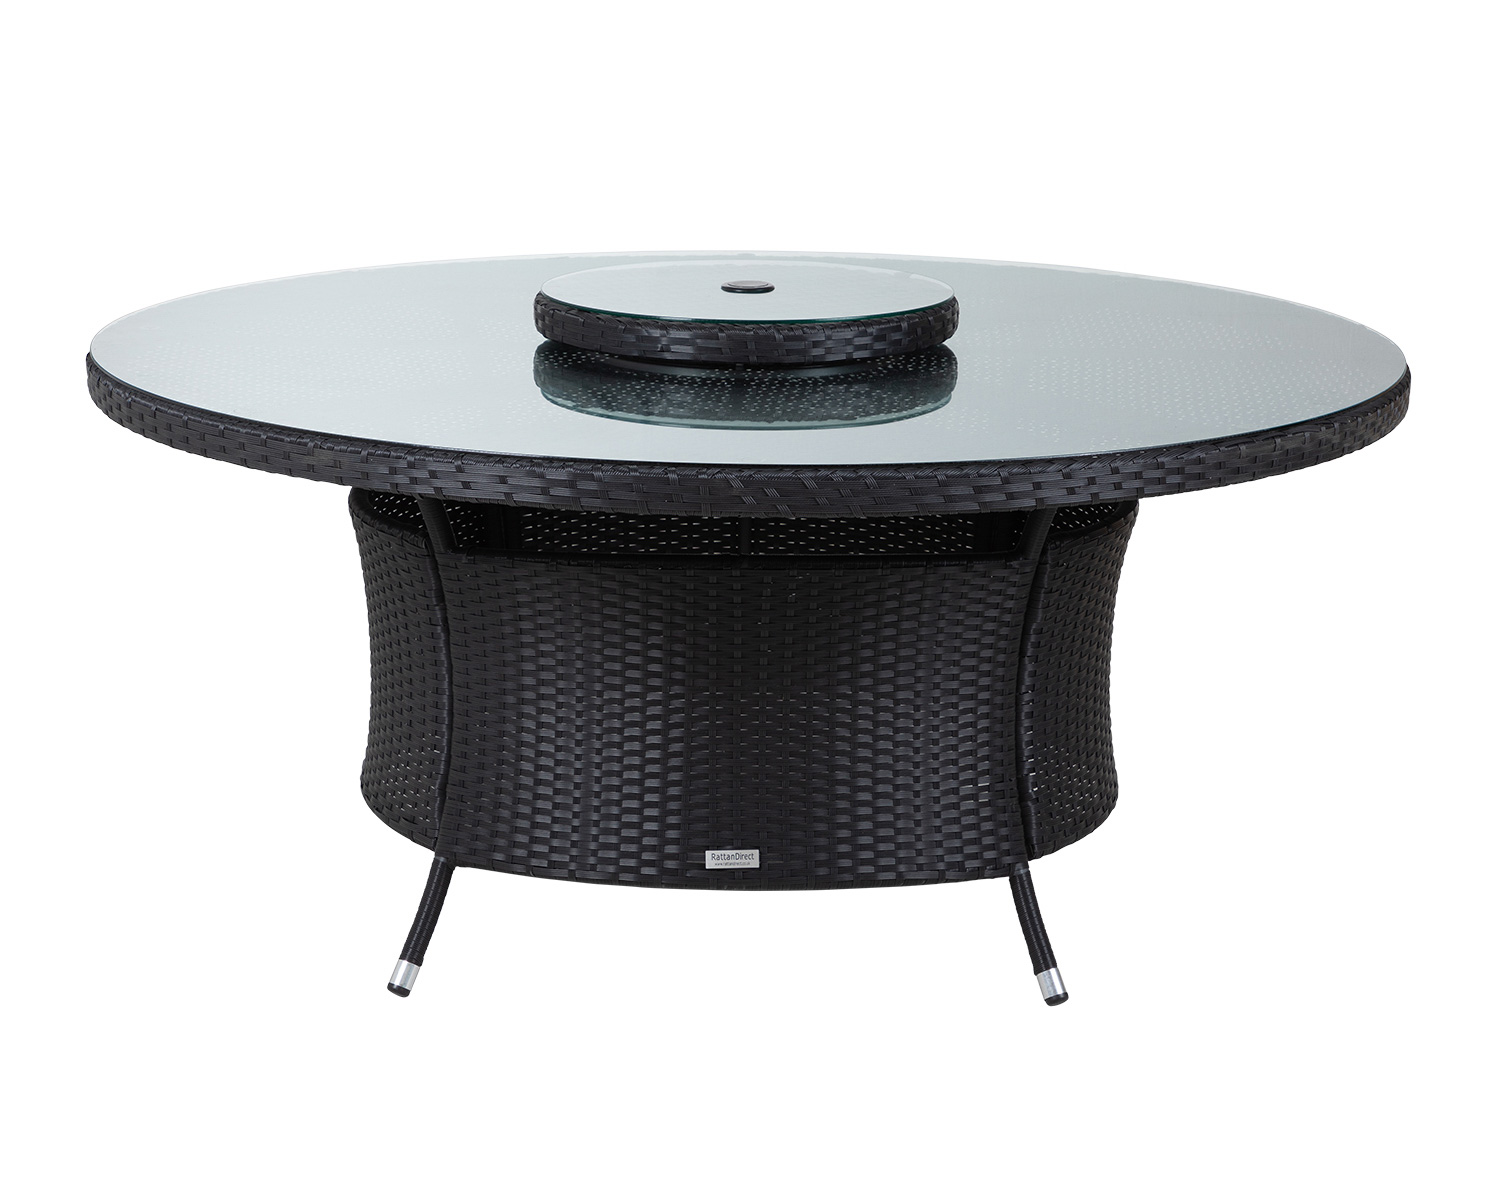 Large Round Rattan Garden Dining Table with Lazy Susan in Black